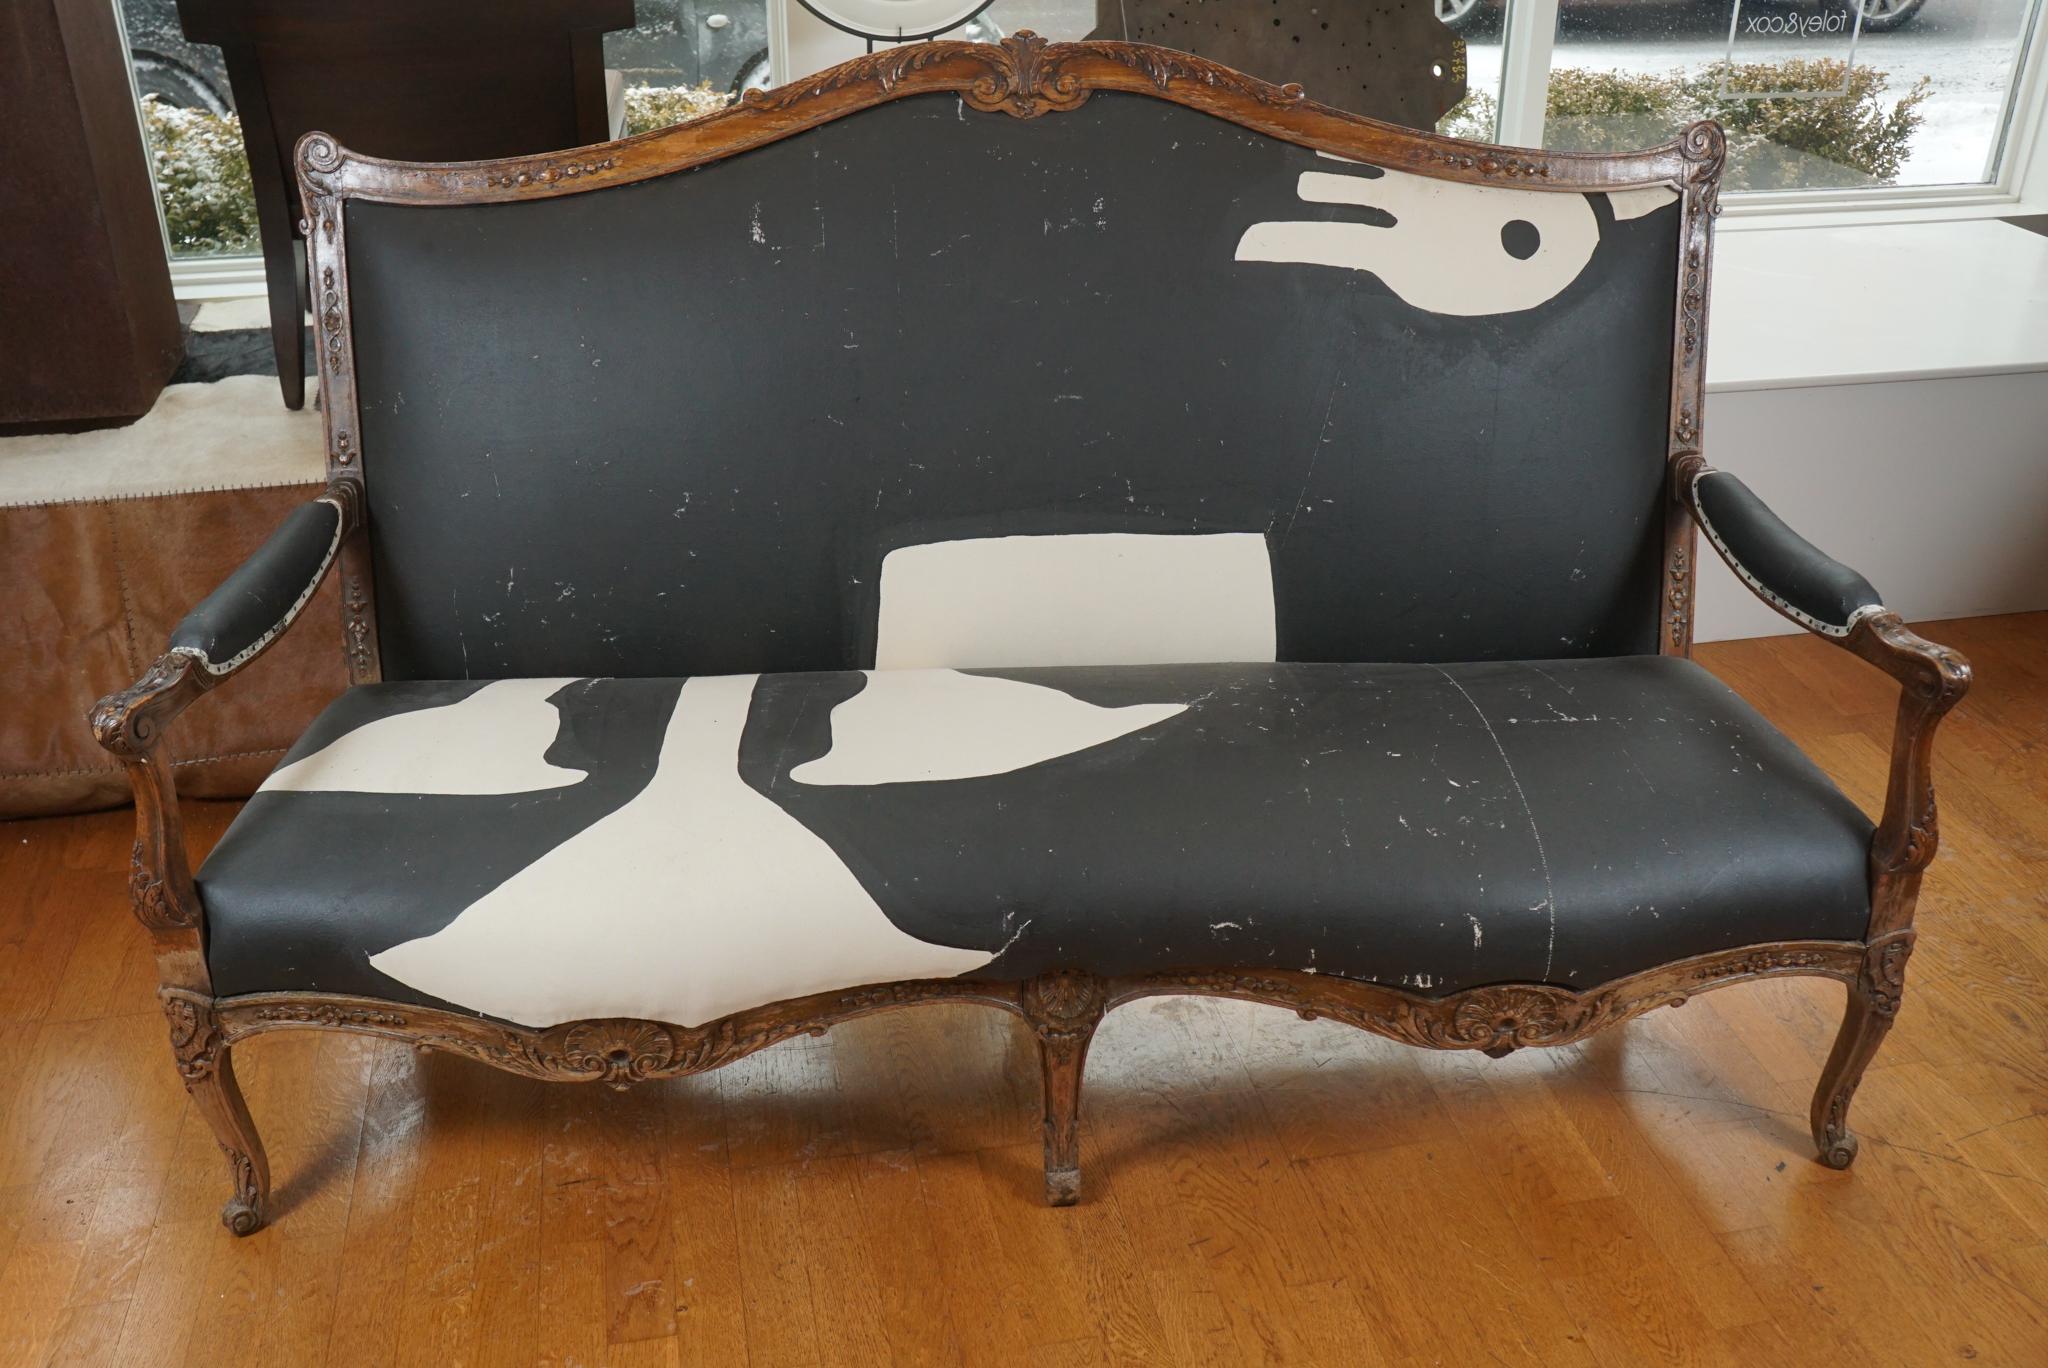 An elegant 19th century French Louis XV style settee, with a shaped crest and skirt. slightly distressed, this settee is carved overall with shells and acanthus leaves. Its unique and incredible upholstery is from a theater set back drop.